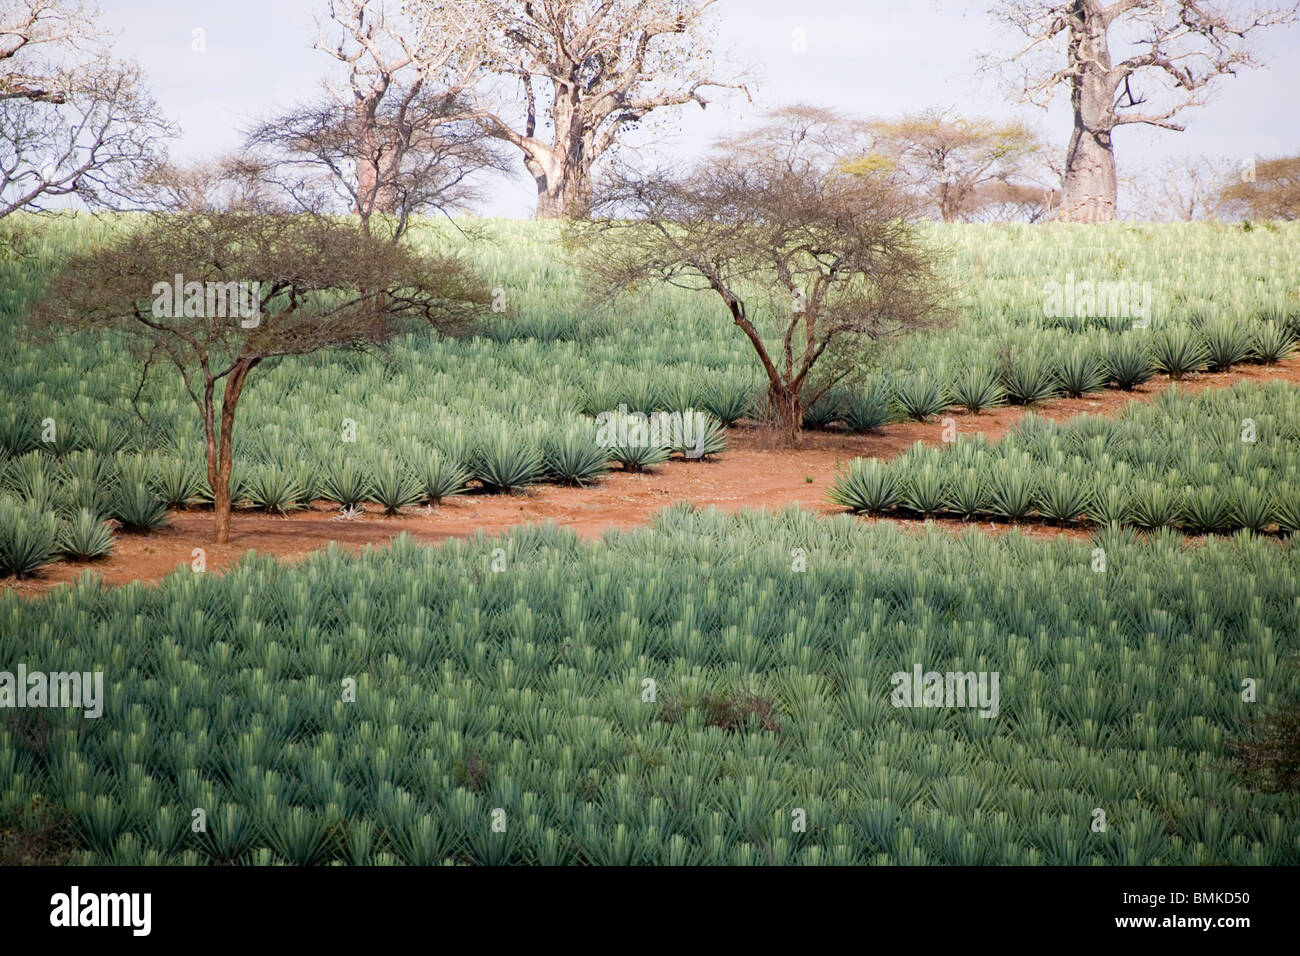 Africa, Kenya. Sisal field dotted with Baobab and Acacia trees. Stock Photo